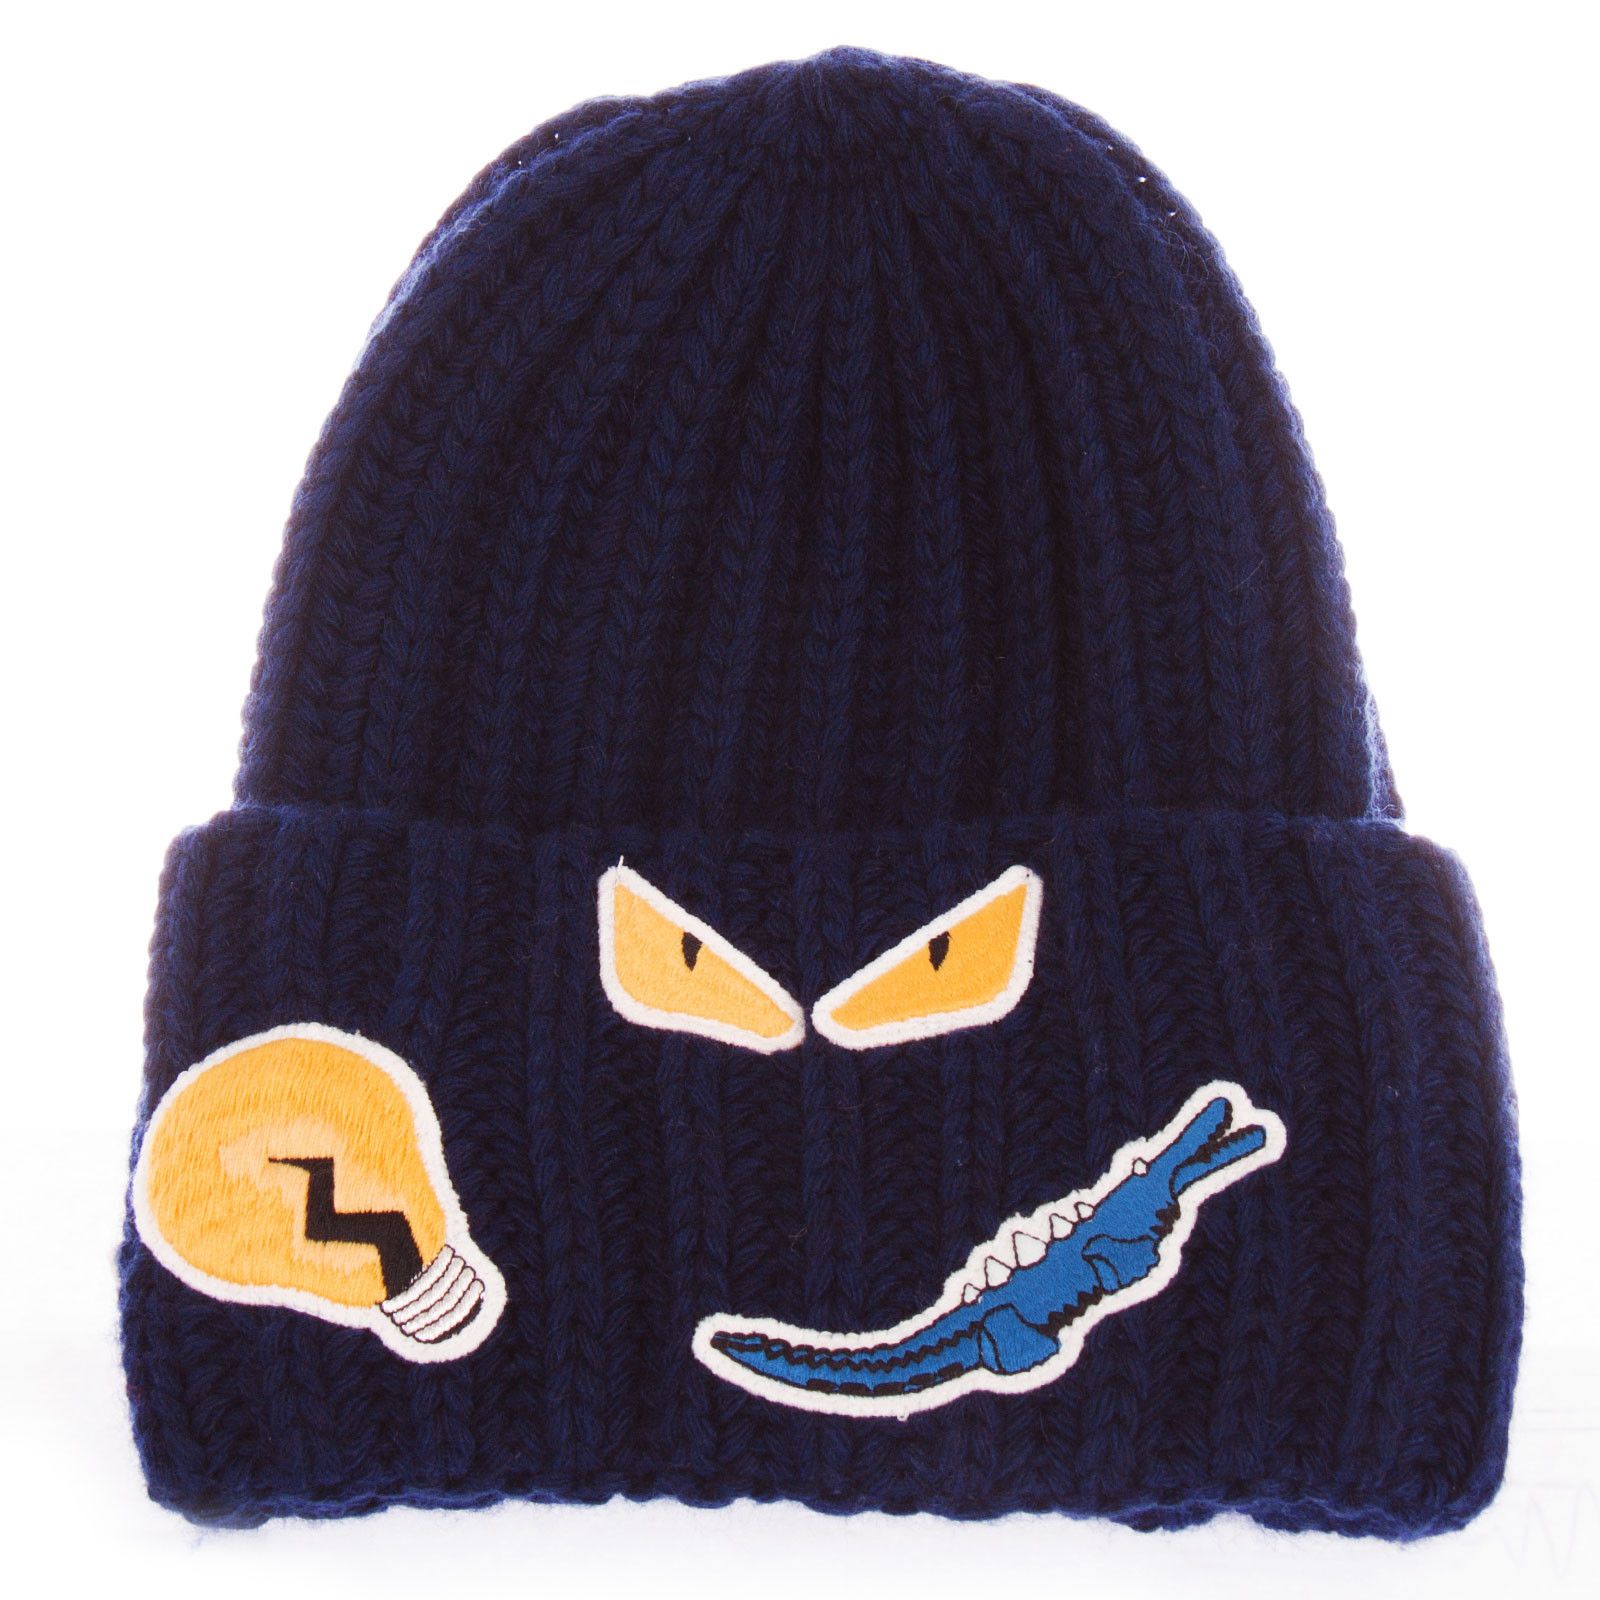 Boys Blue Monster Printed Knitted Wool Hat - CÉMAROSE | Children's Fashion Store - 1